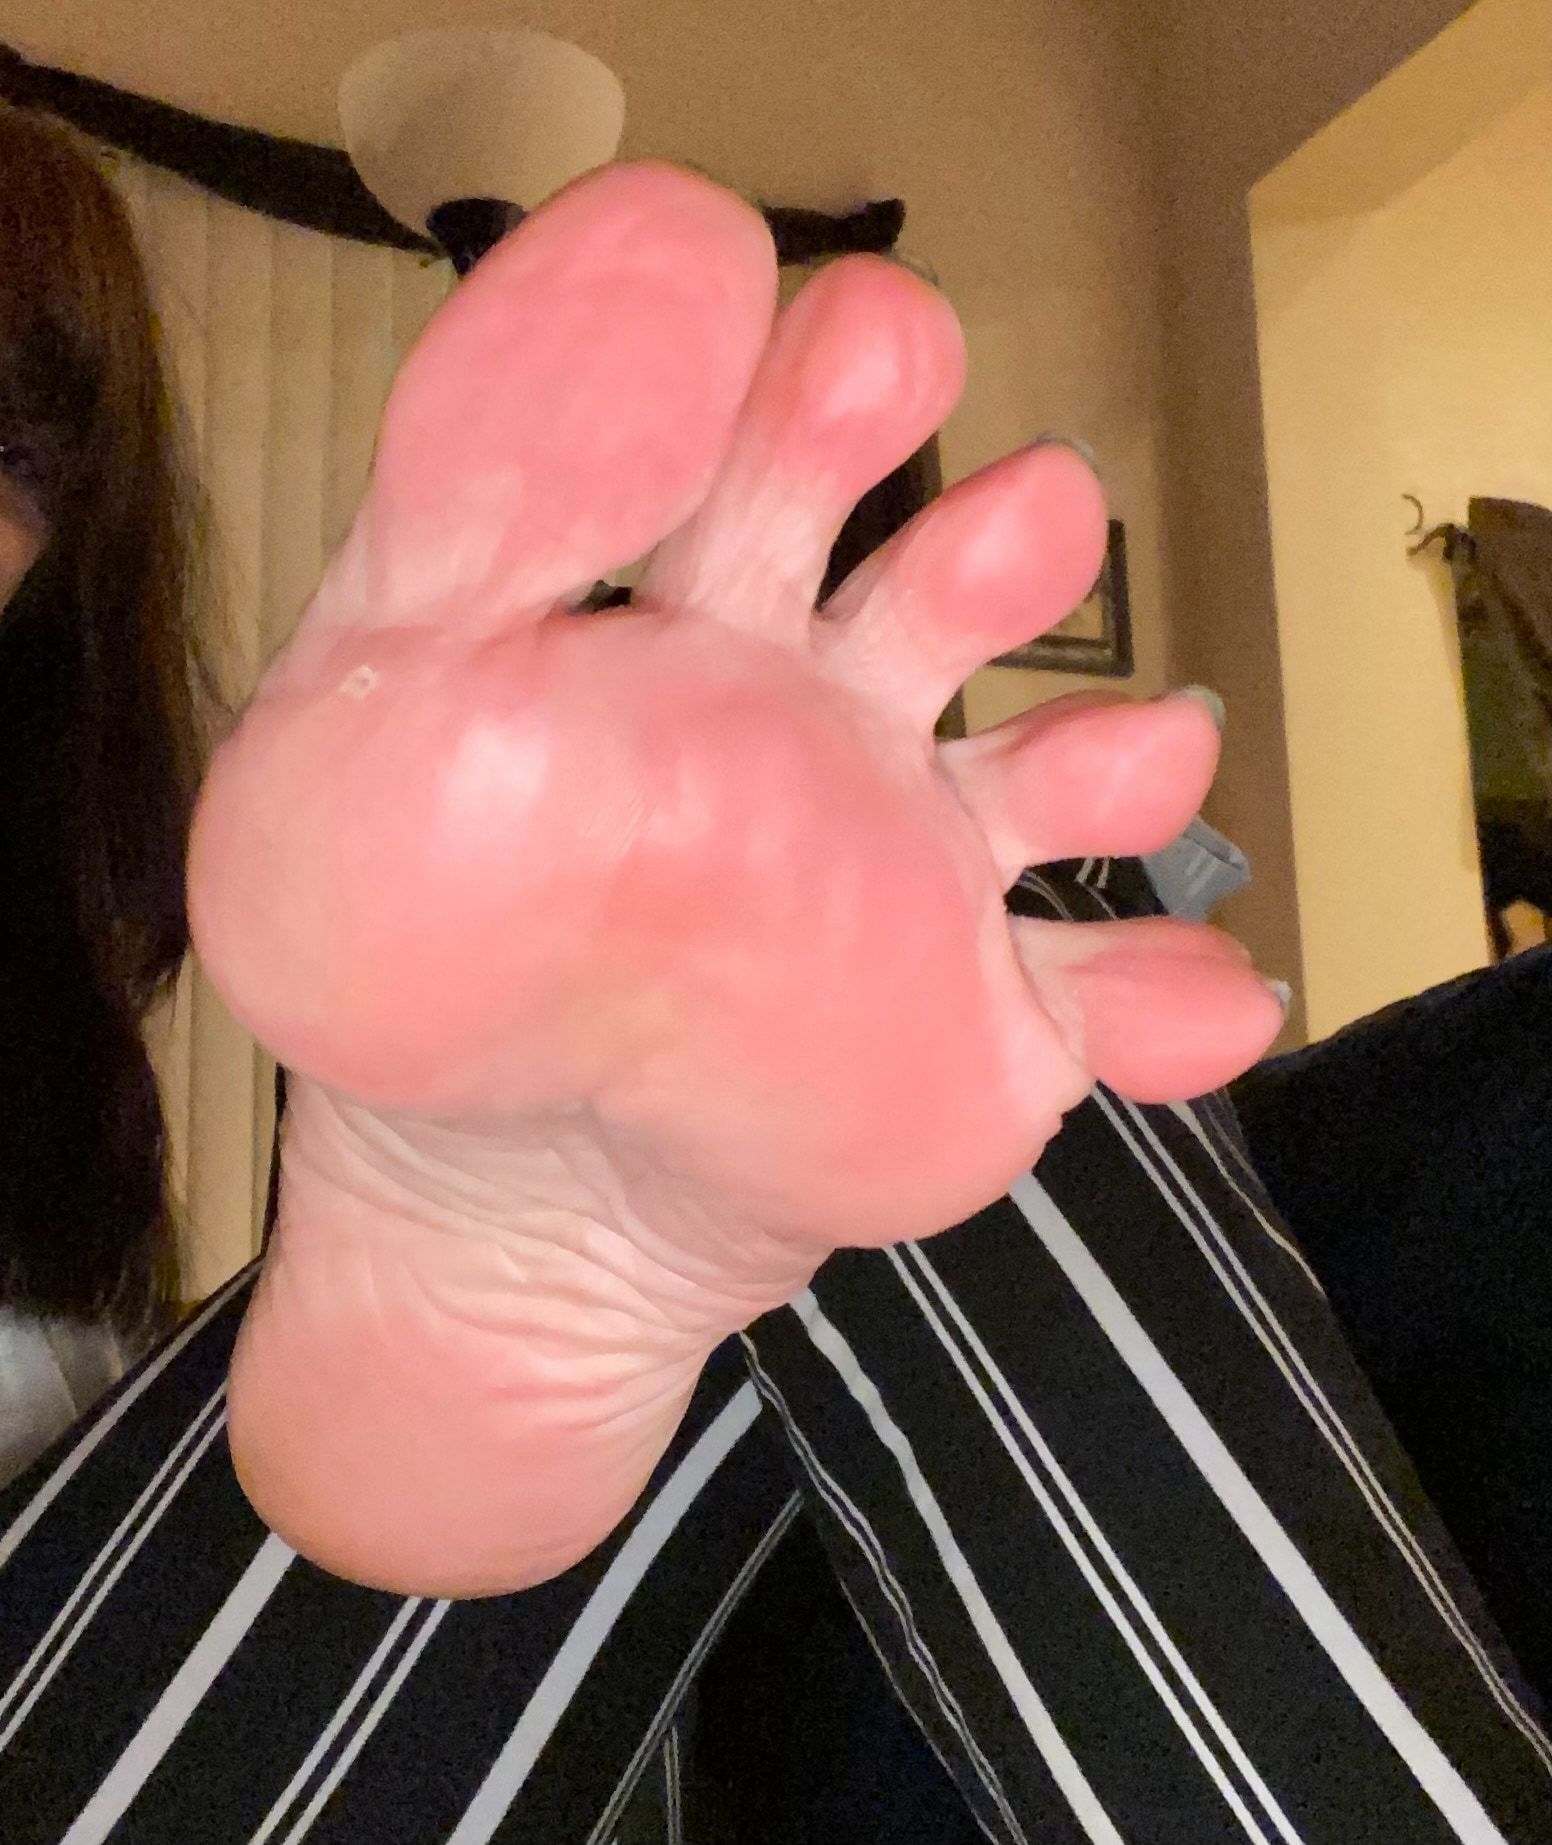 Bare Clean Lickable Sexy Mature Soles #5